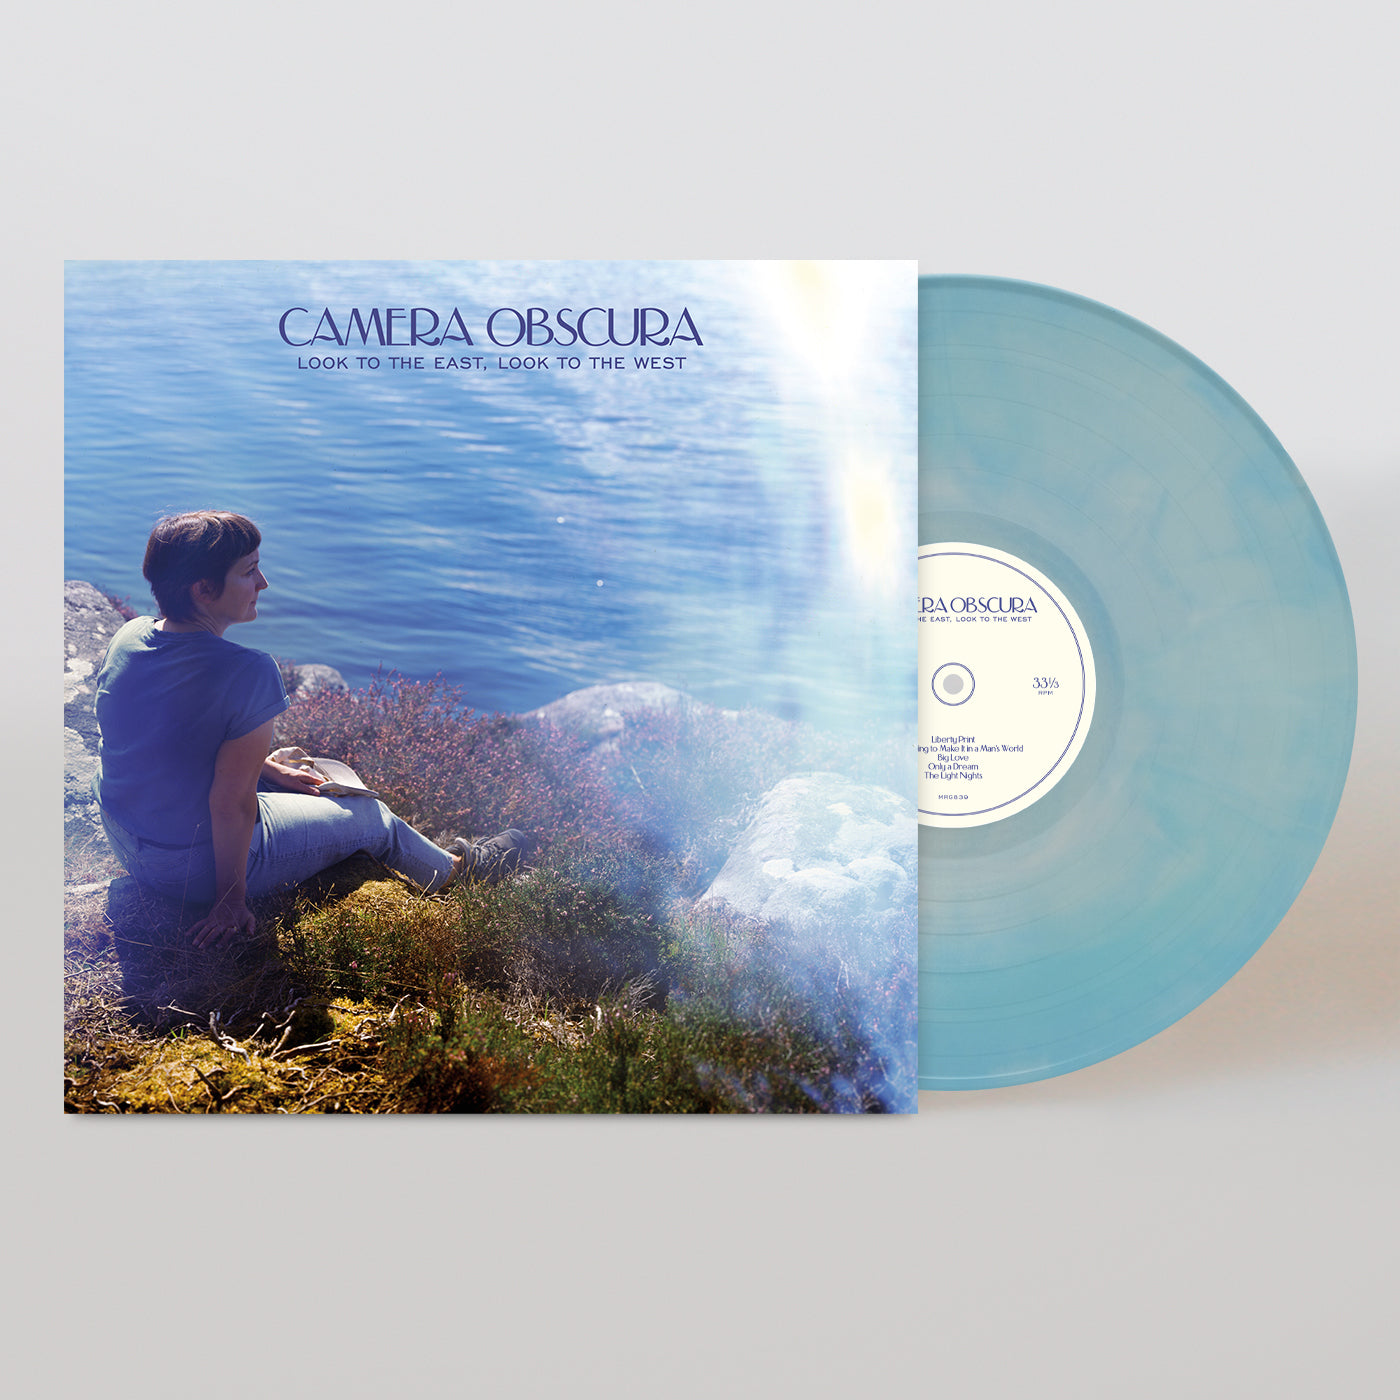 Camera Obscura - Look to the East, Look to the West (Baby Blue & White Galaxy Vinyl)